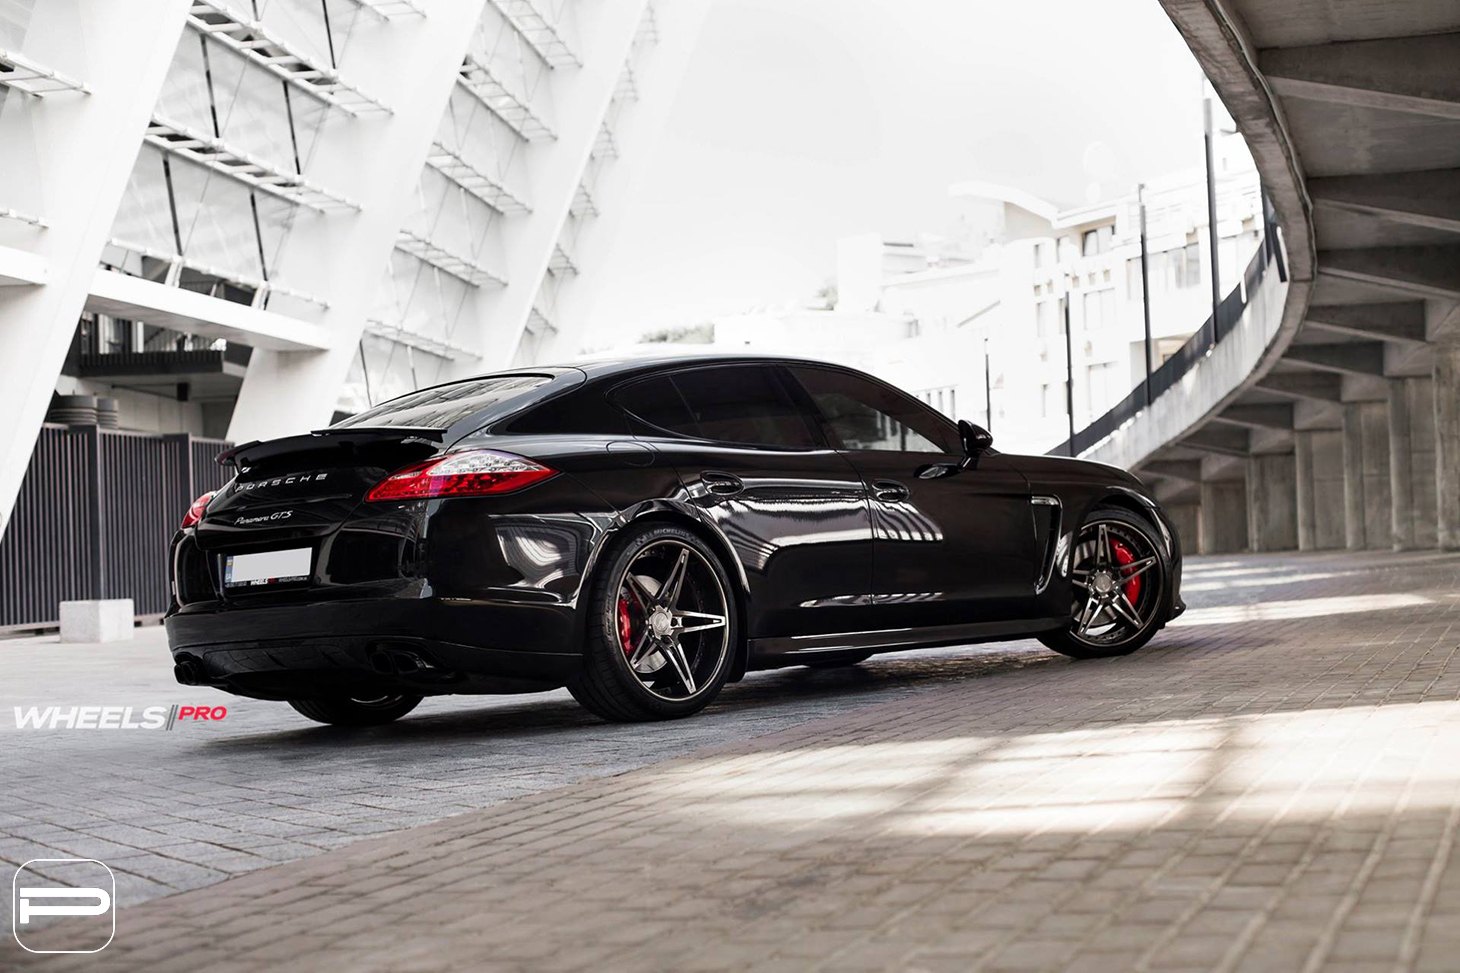 Aftermarket Side Skirts on Black Porsche Panamera - Photo by PUR Wheels